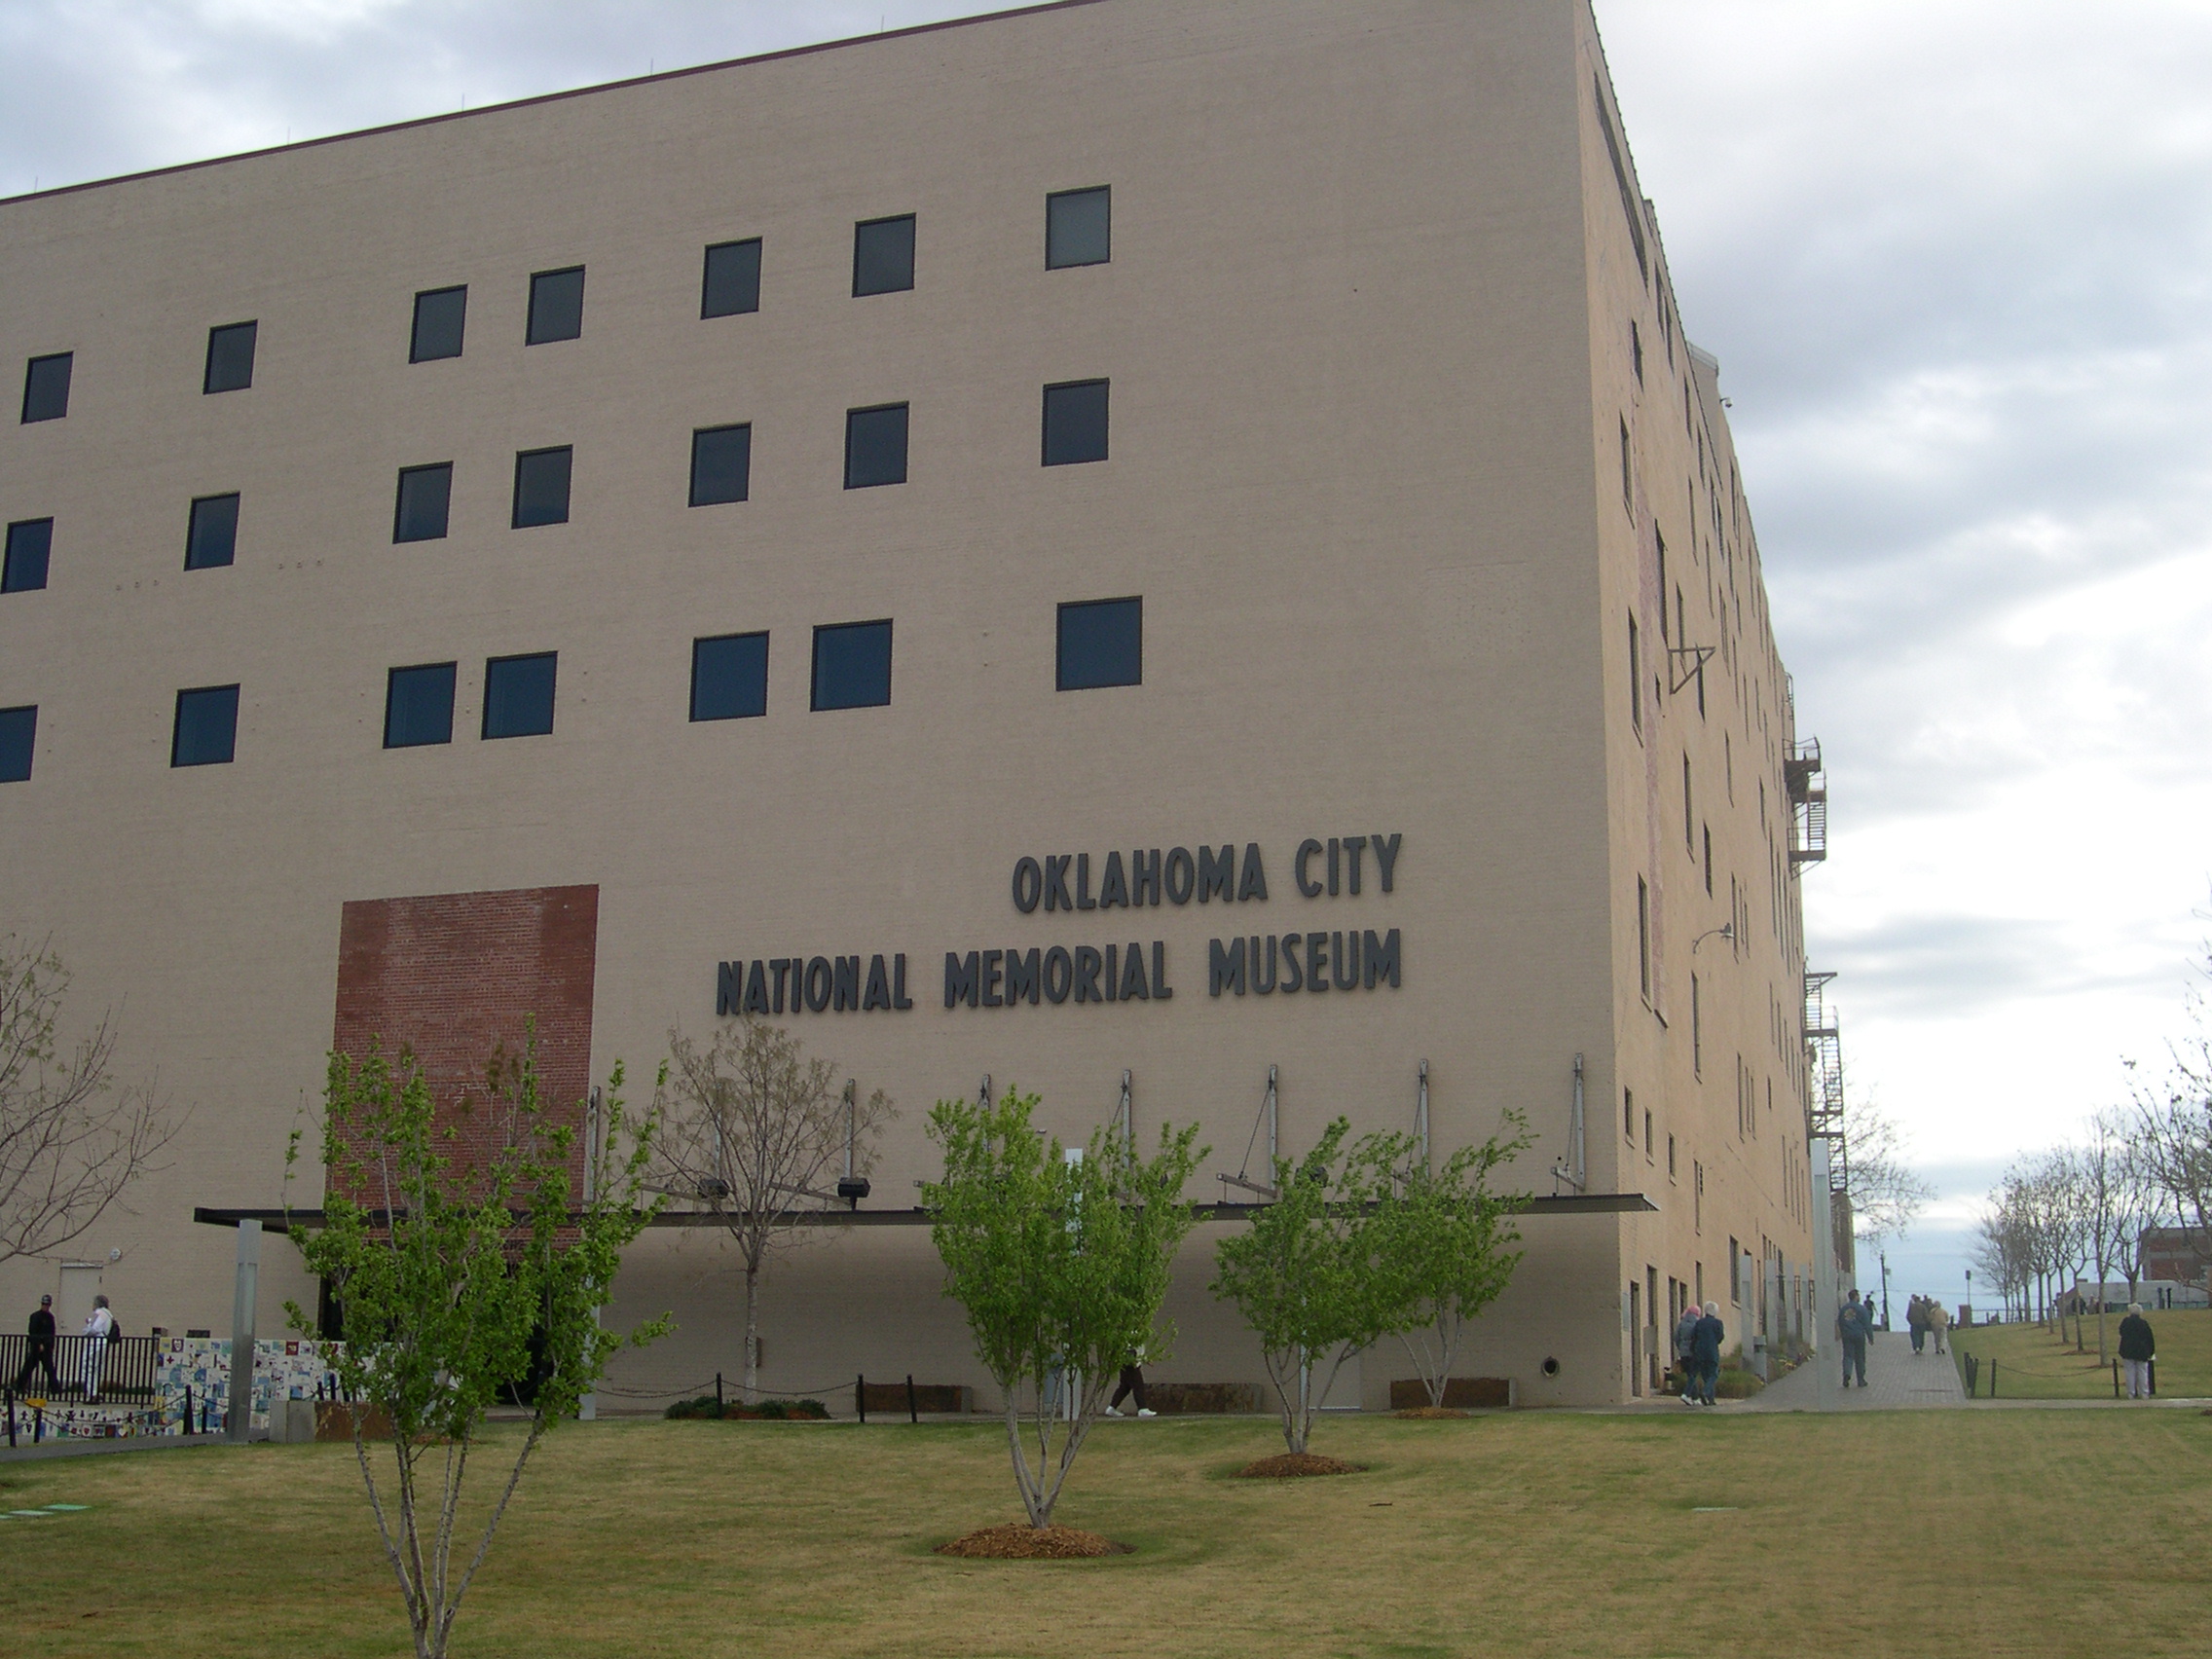 Oklahoma bombing museum closes, Tulsa cancels large events